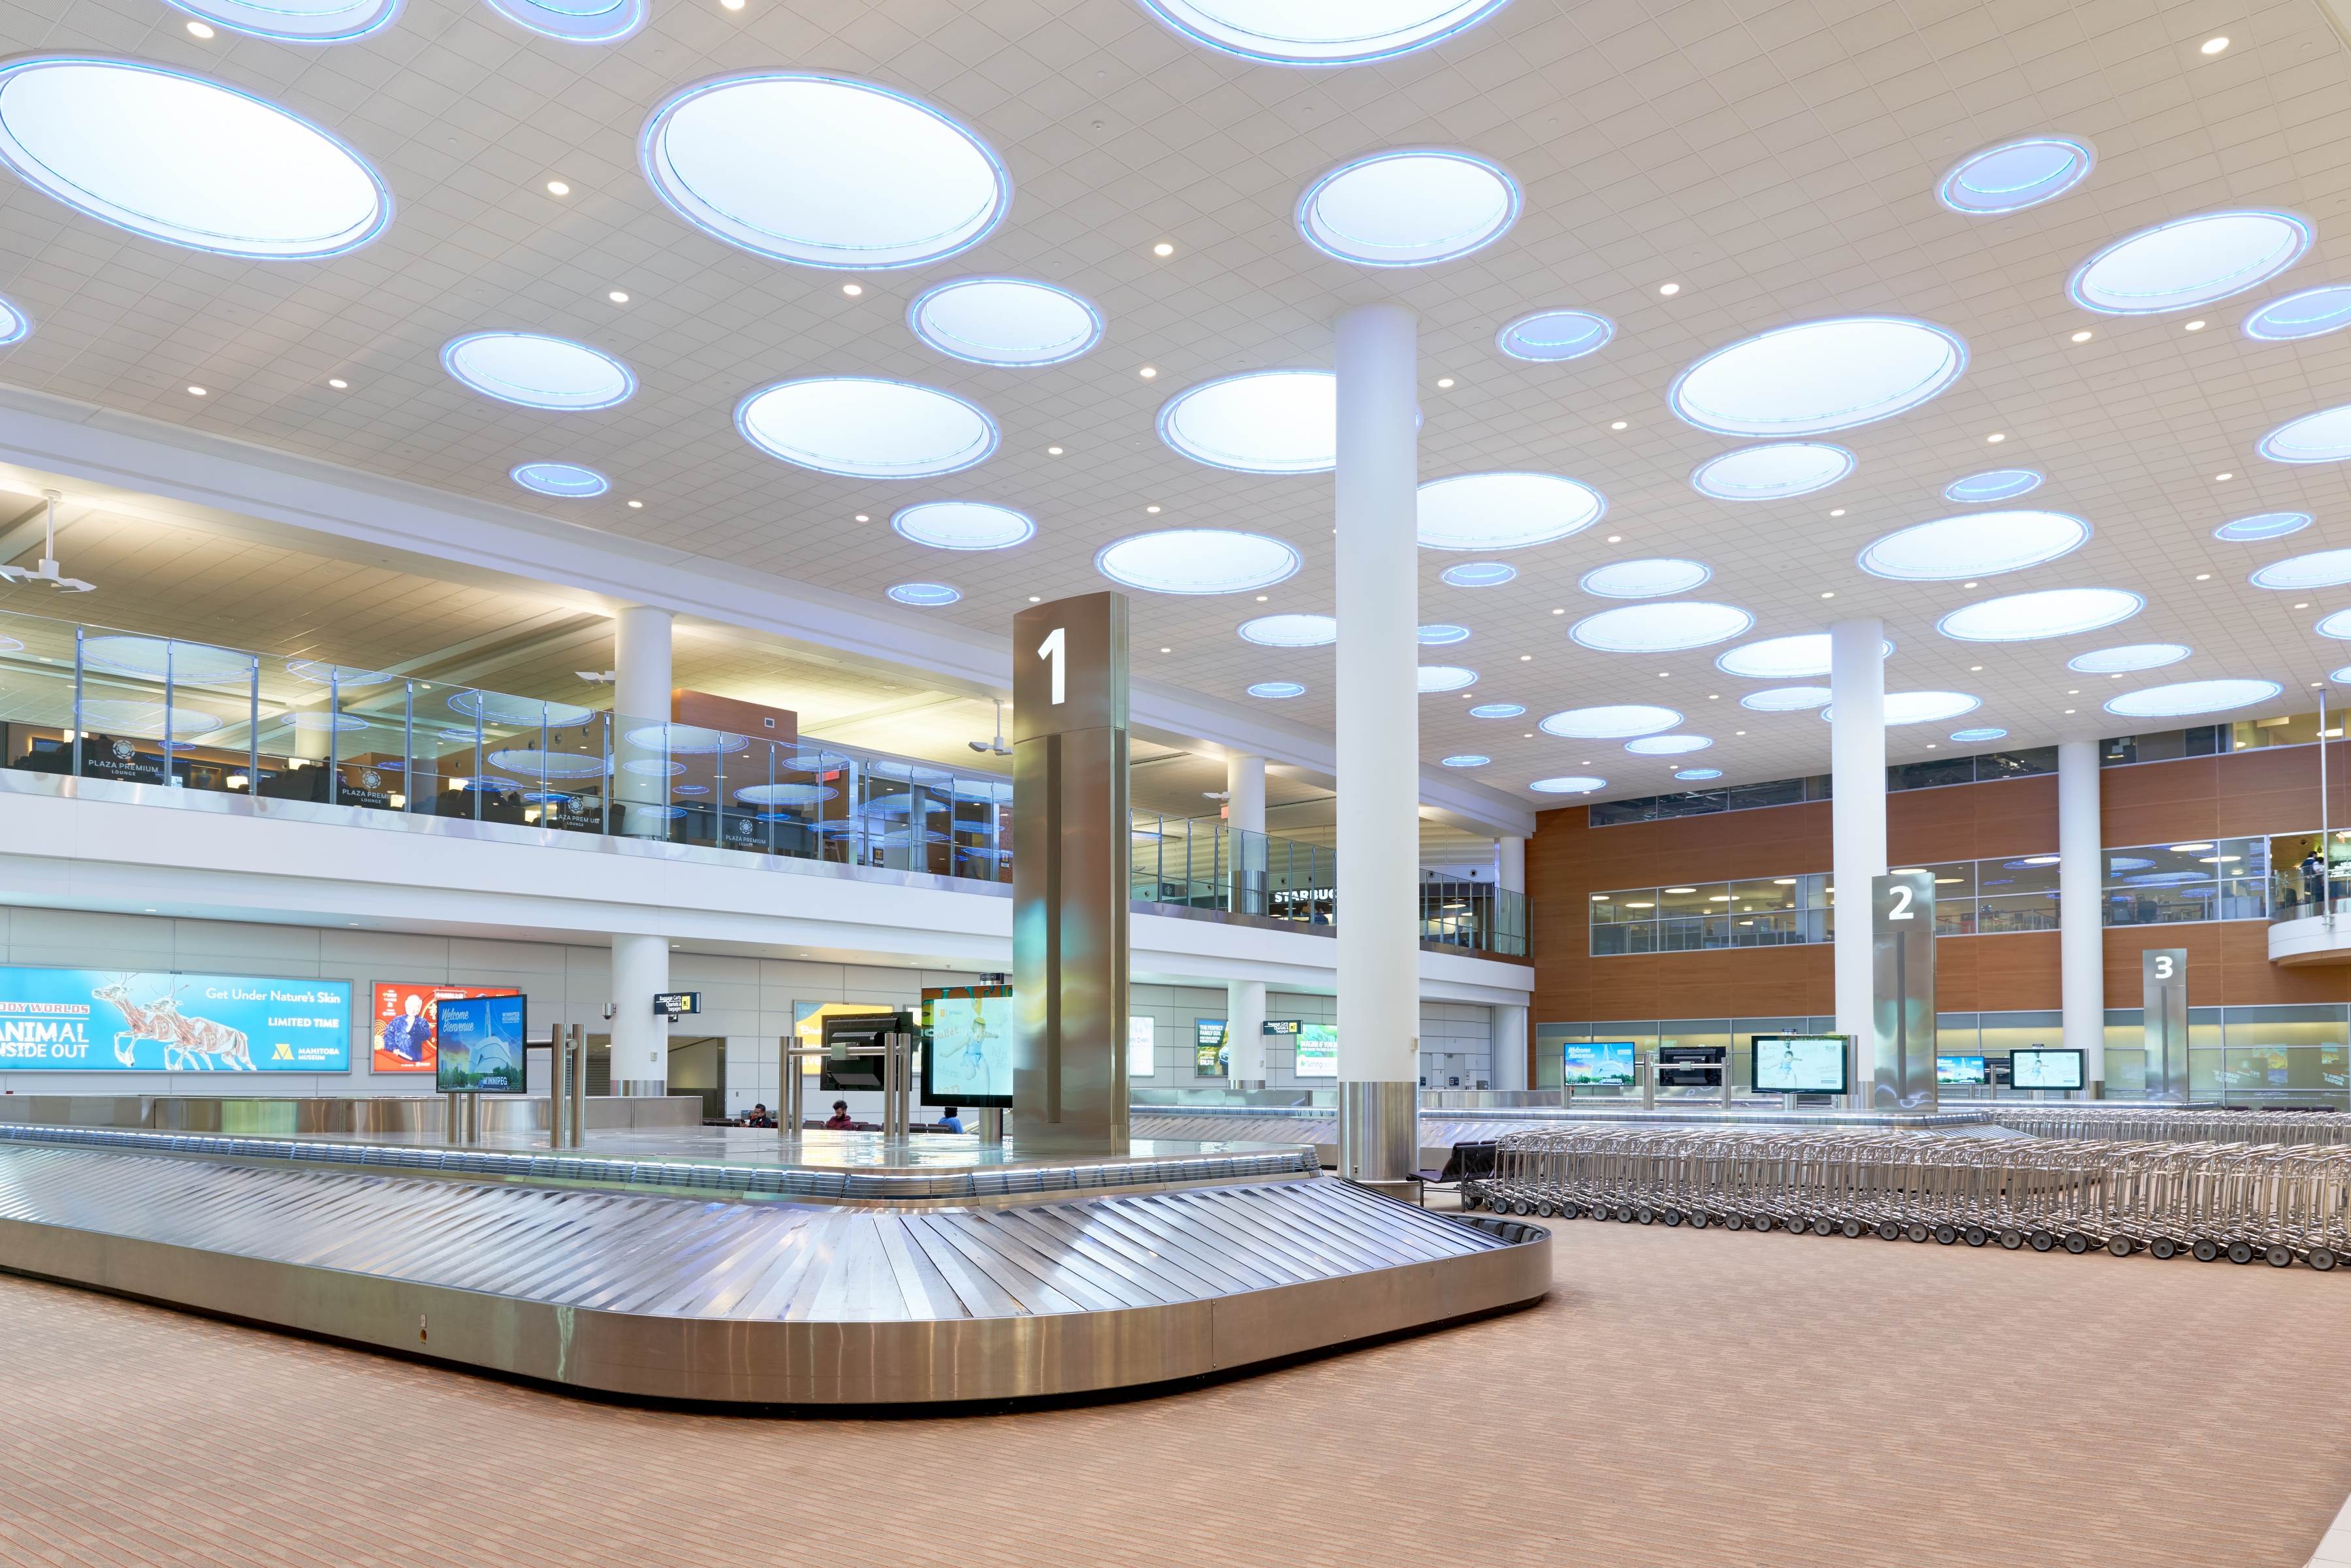 Brightly lit Arrivals Hall with luggage carts and baggage carousels.